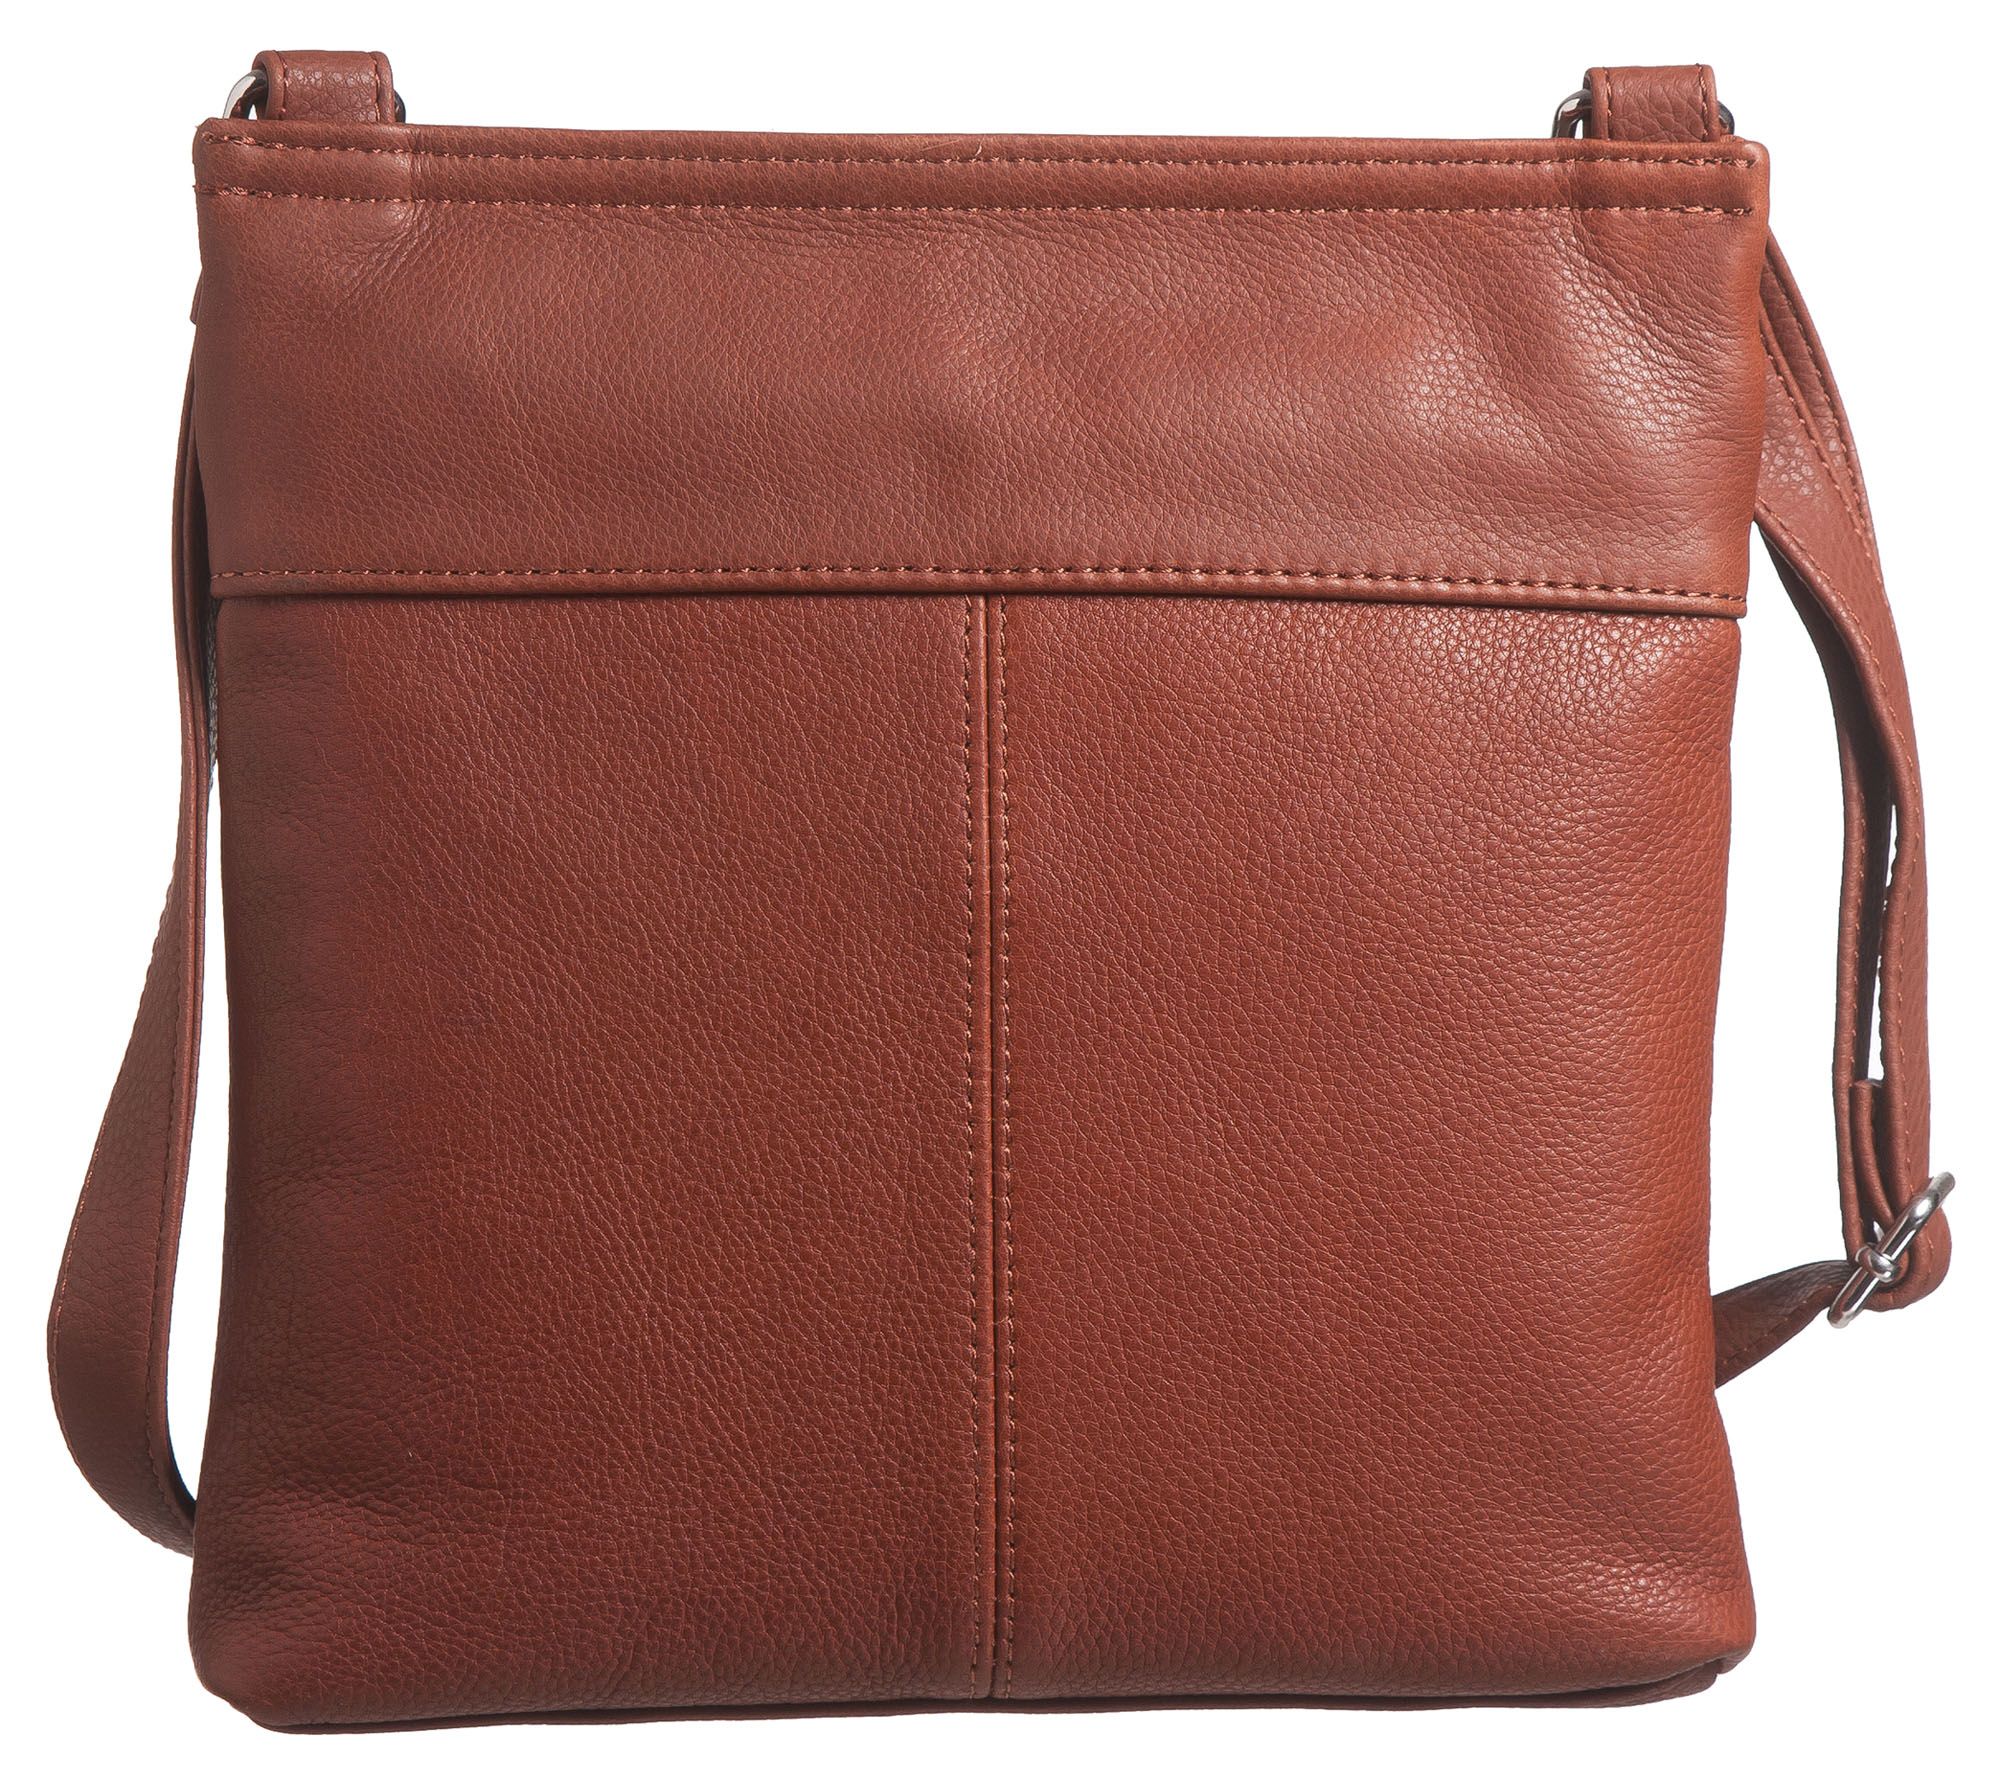 Stone Mountain USA Butter Leather North/South Crossbody Bag - QVC.com